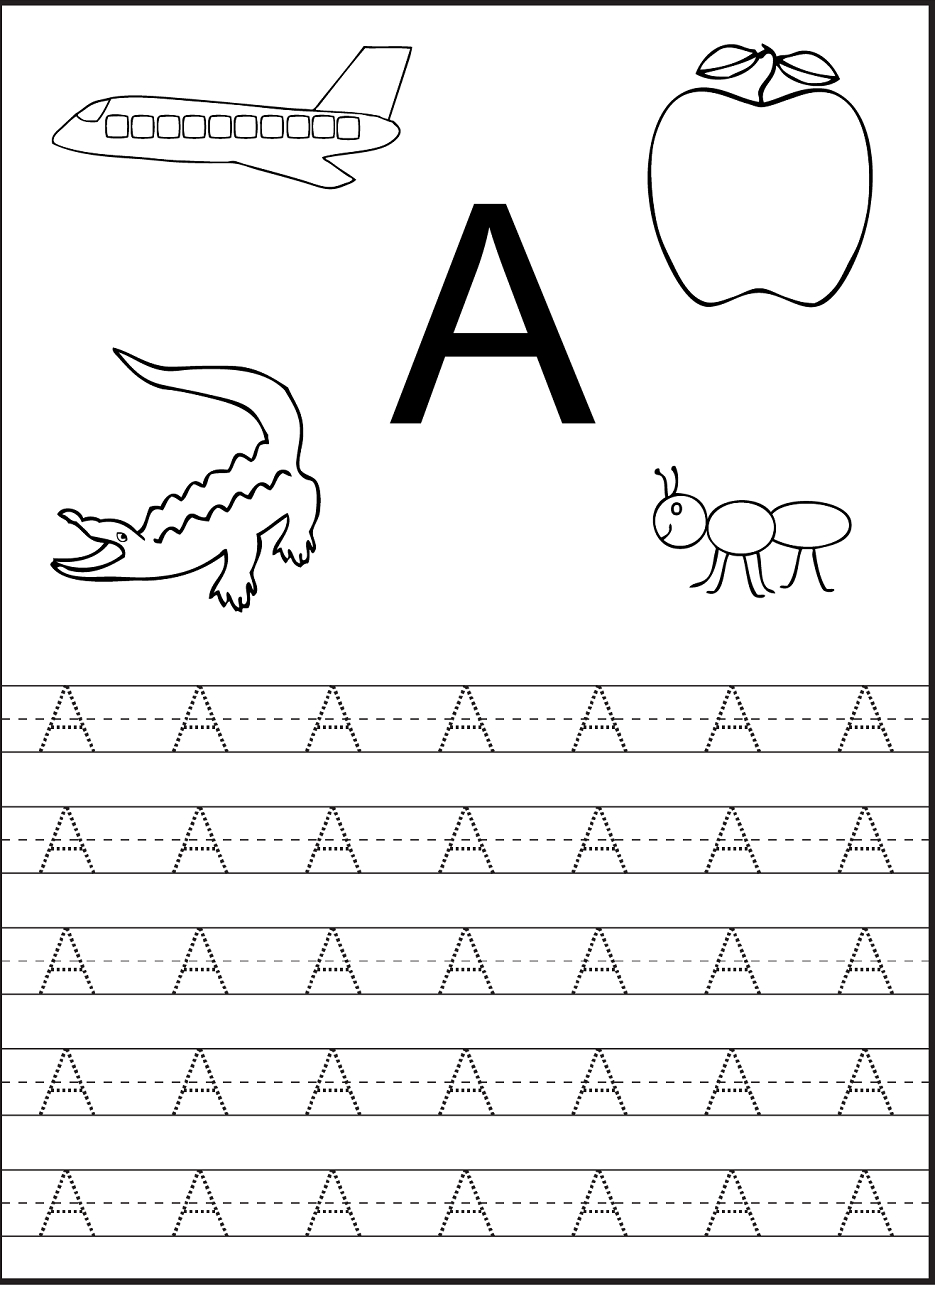 Tracing The Letter A Free Printable | Druckvorlage with regard to Pre K Tracing Letters Worksheets